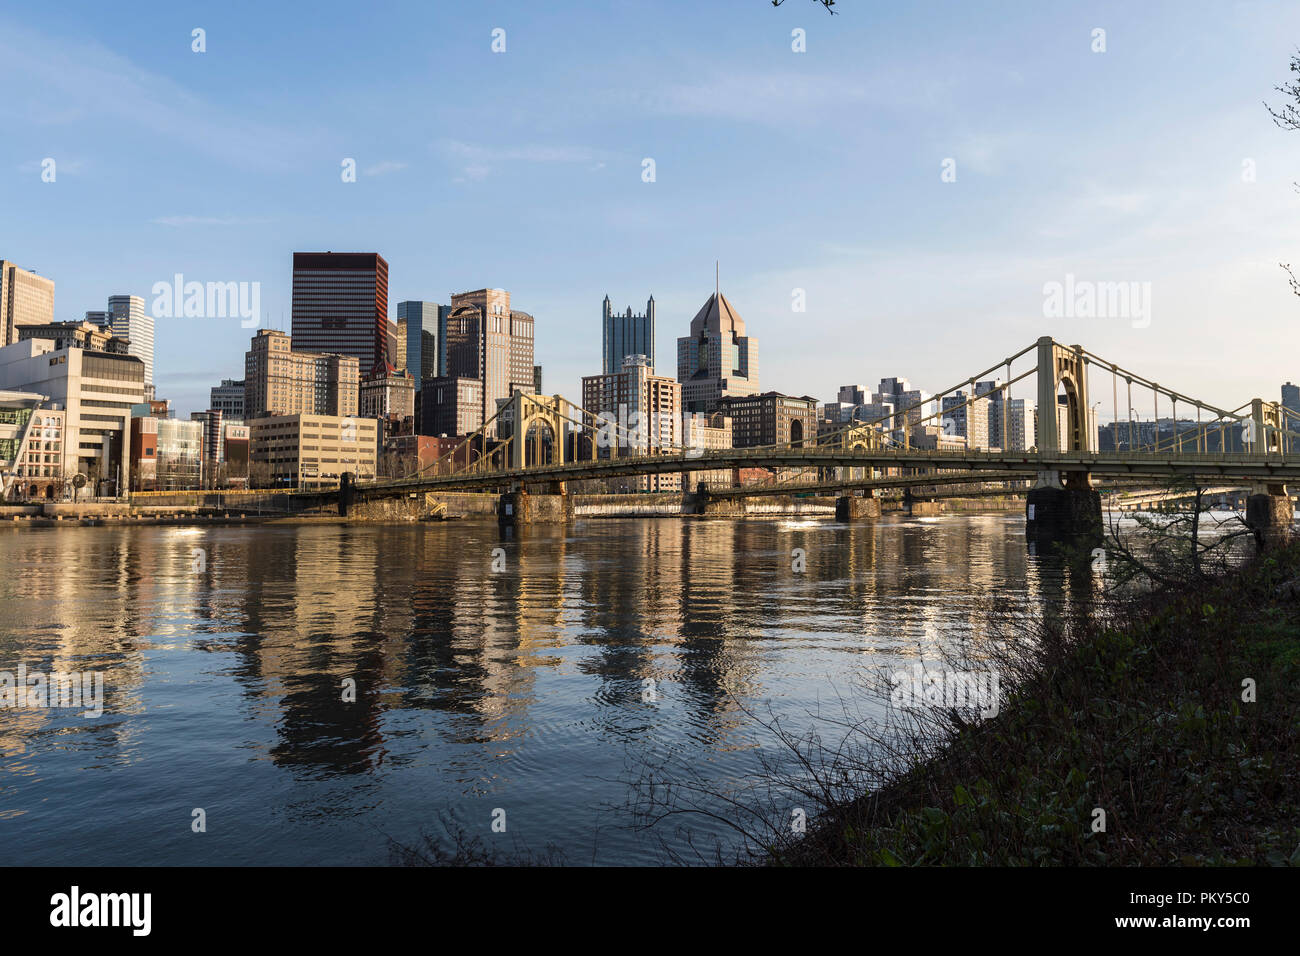 Downtown river waterfront and bridges crossing the Allegheny River in Pittsburgh, Pennsylvania. Stock Photo